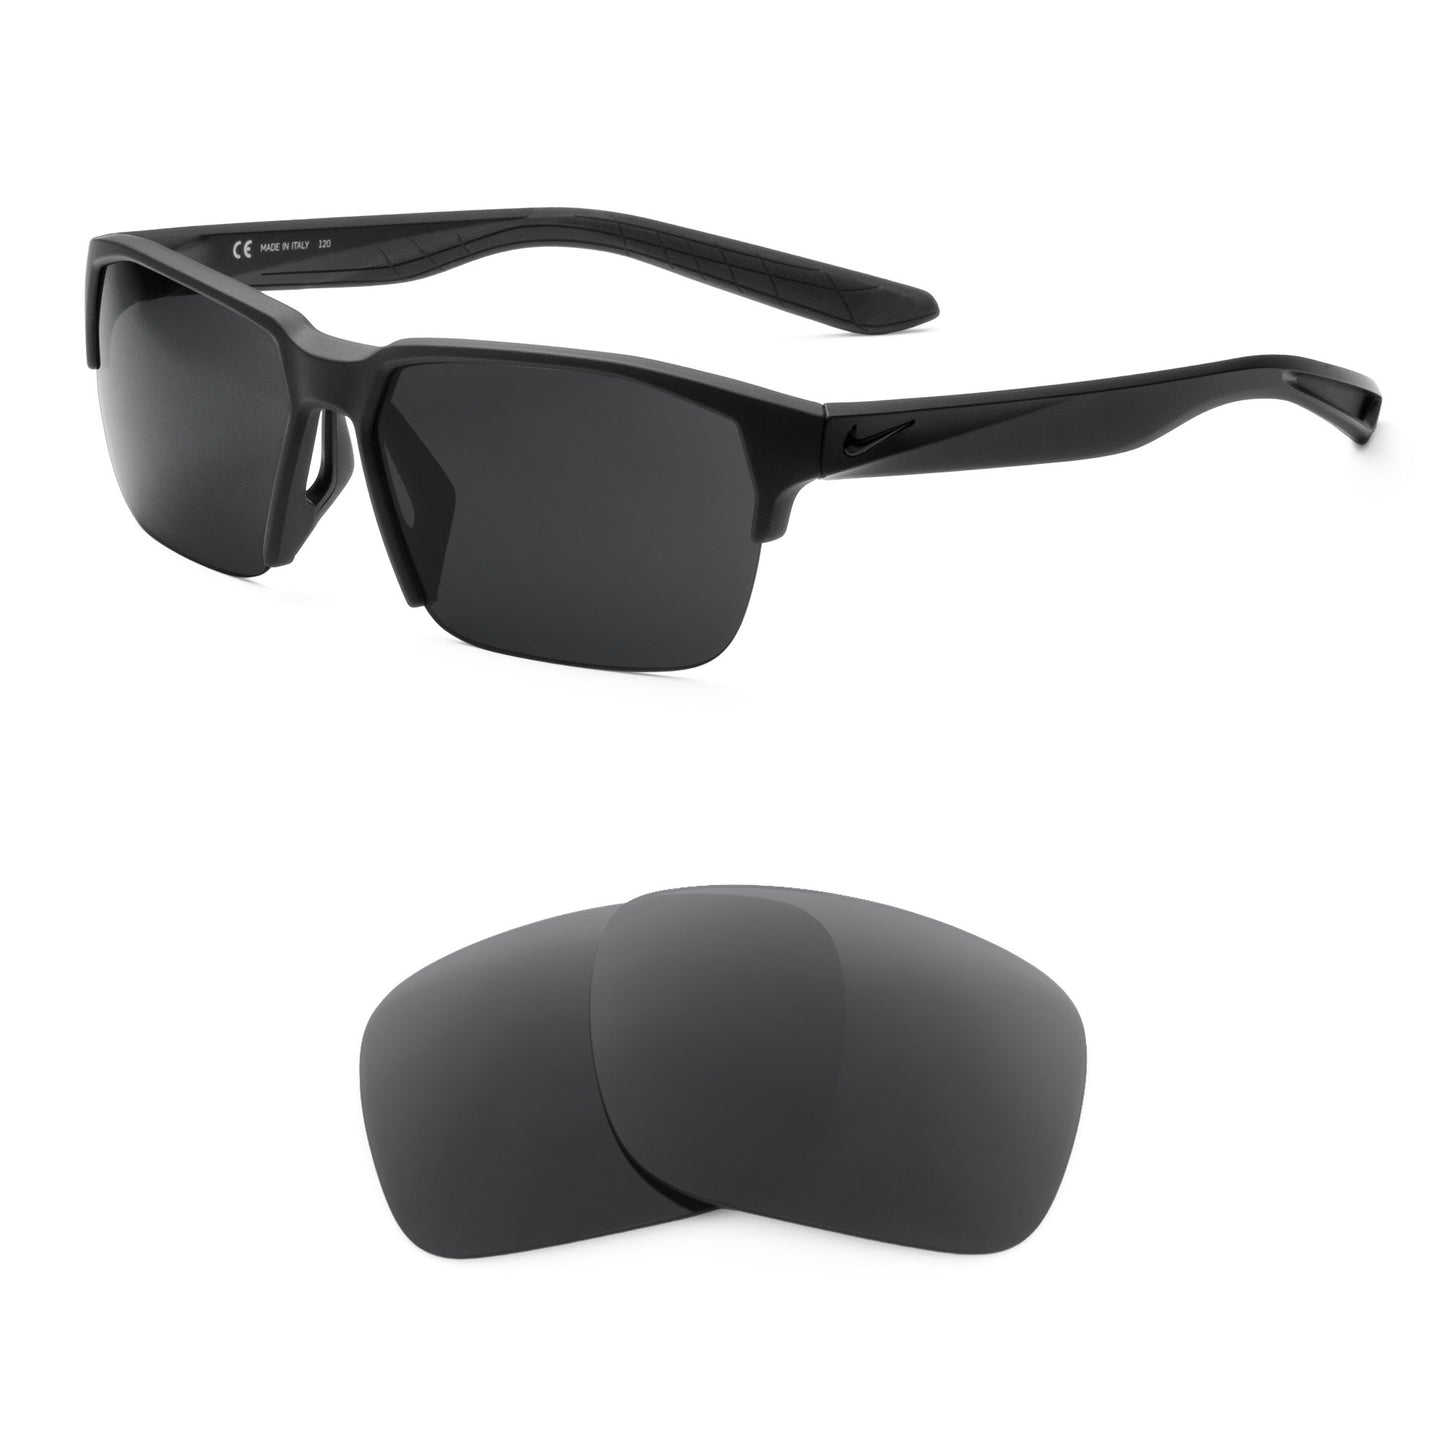 Nike Maverick Free sunglasses with replacement lenses